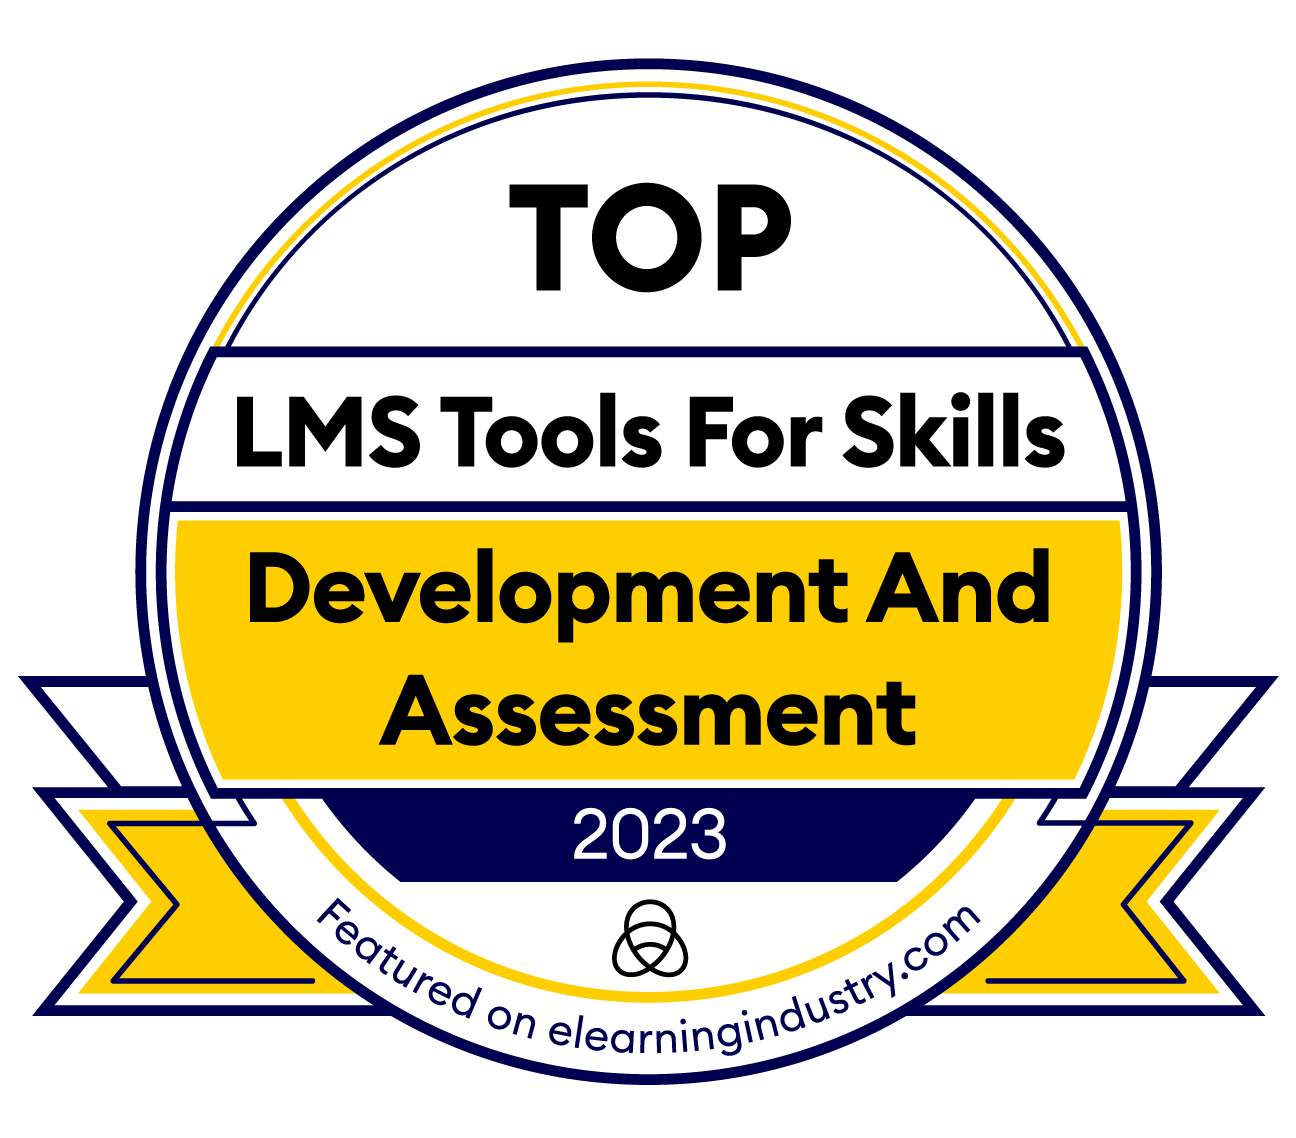 Brainier Named 2023 Top LMS for Skills Development and Assessment by eLearningIndustry.com